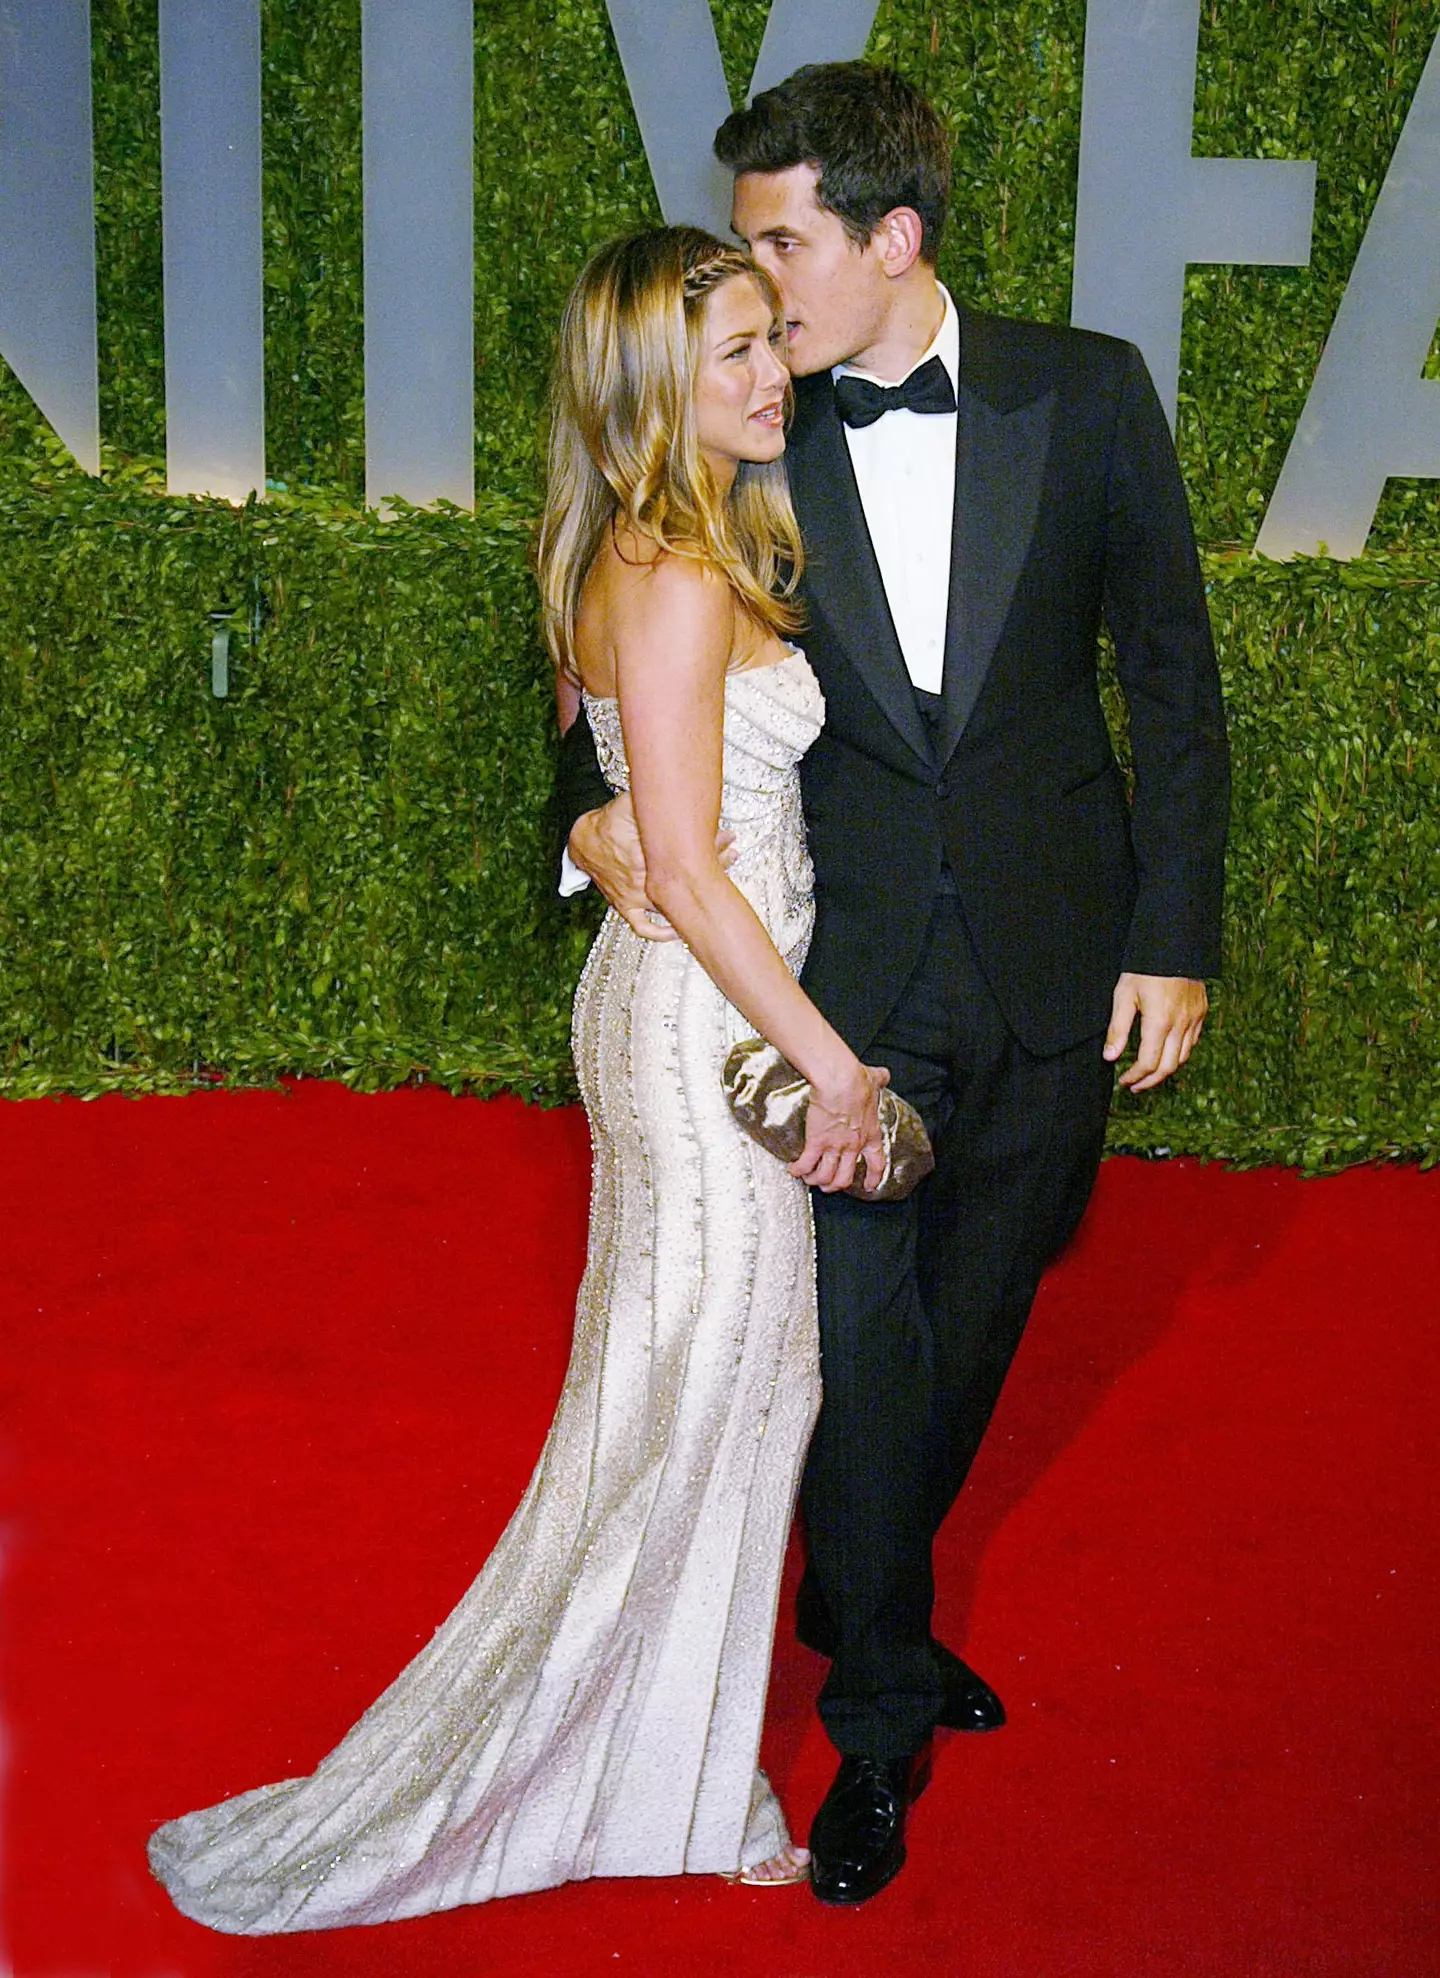 Jennifer Aniston and John Mayer dated for about a year.